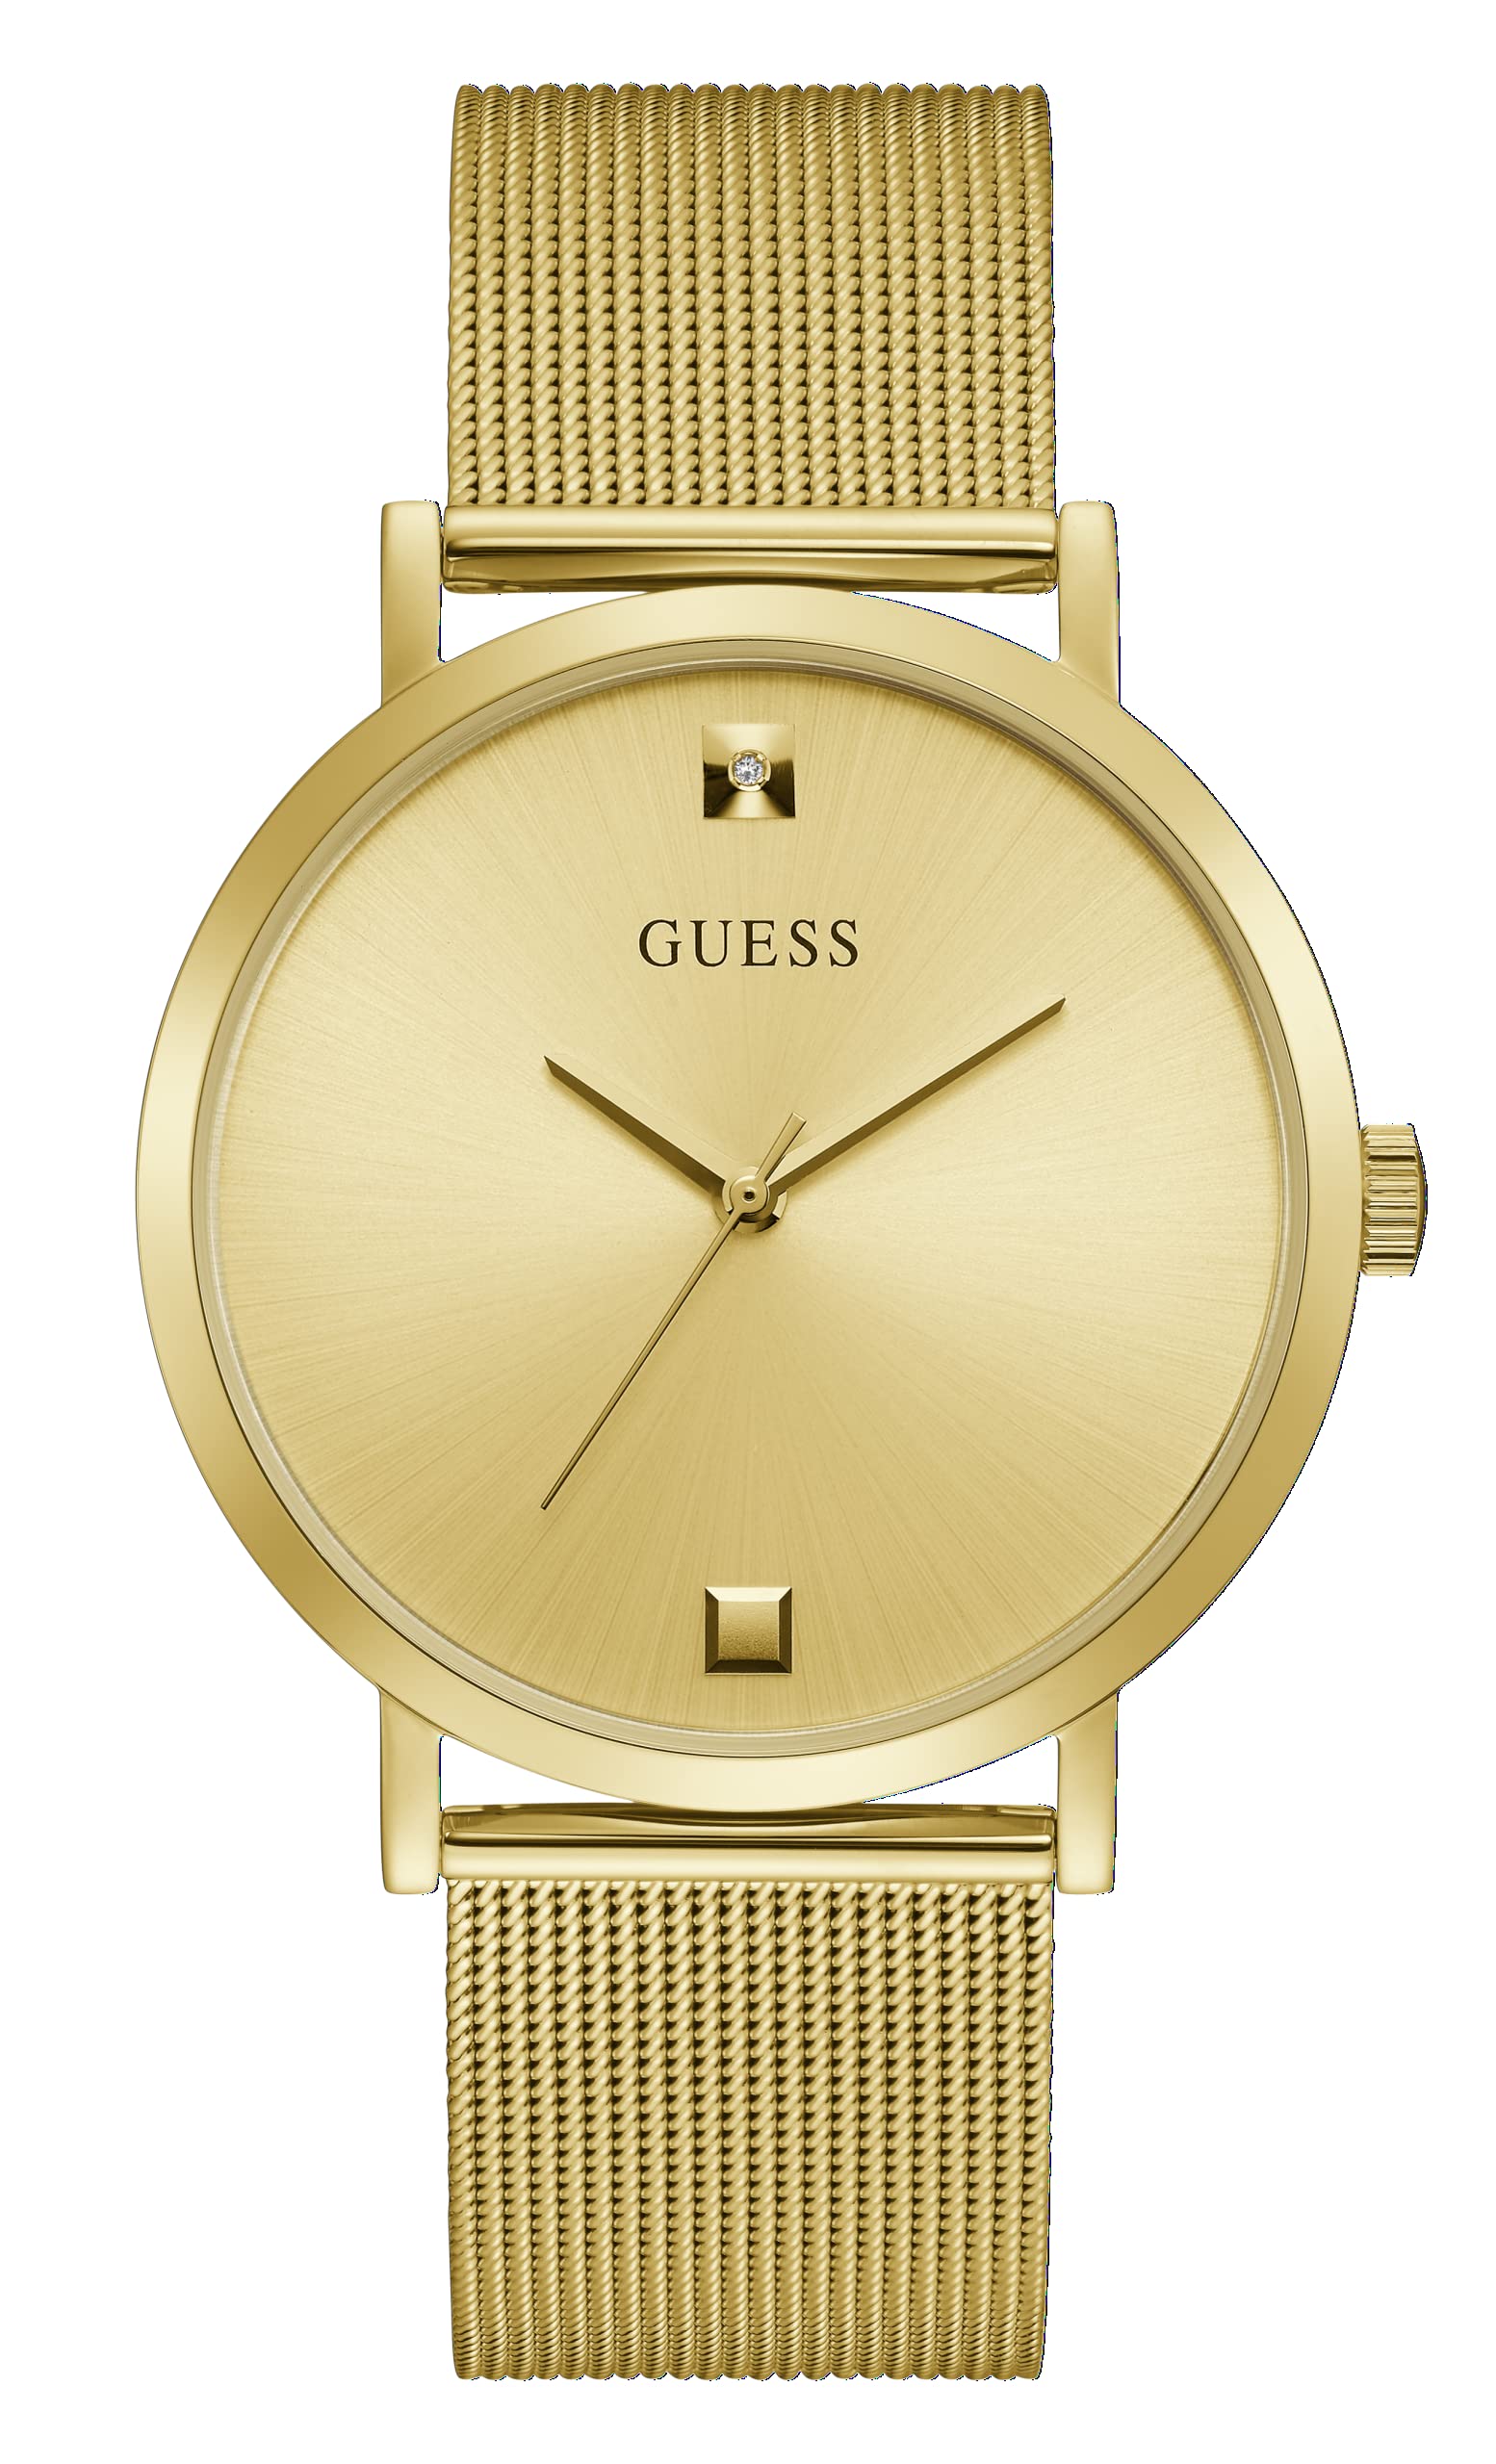 GUESS Mens Dress Multifunction 42mm Watch – Gold-Tone Stainless Steel Case with Black Dial & Bracelet